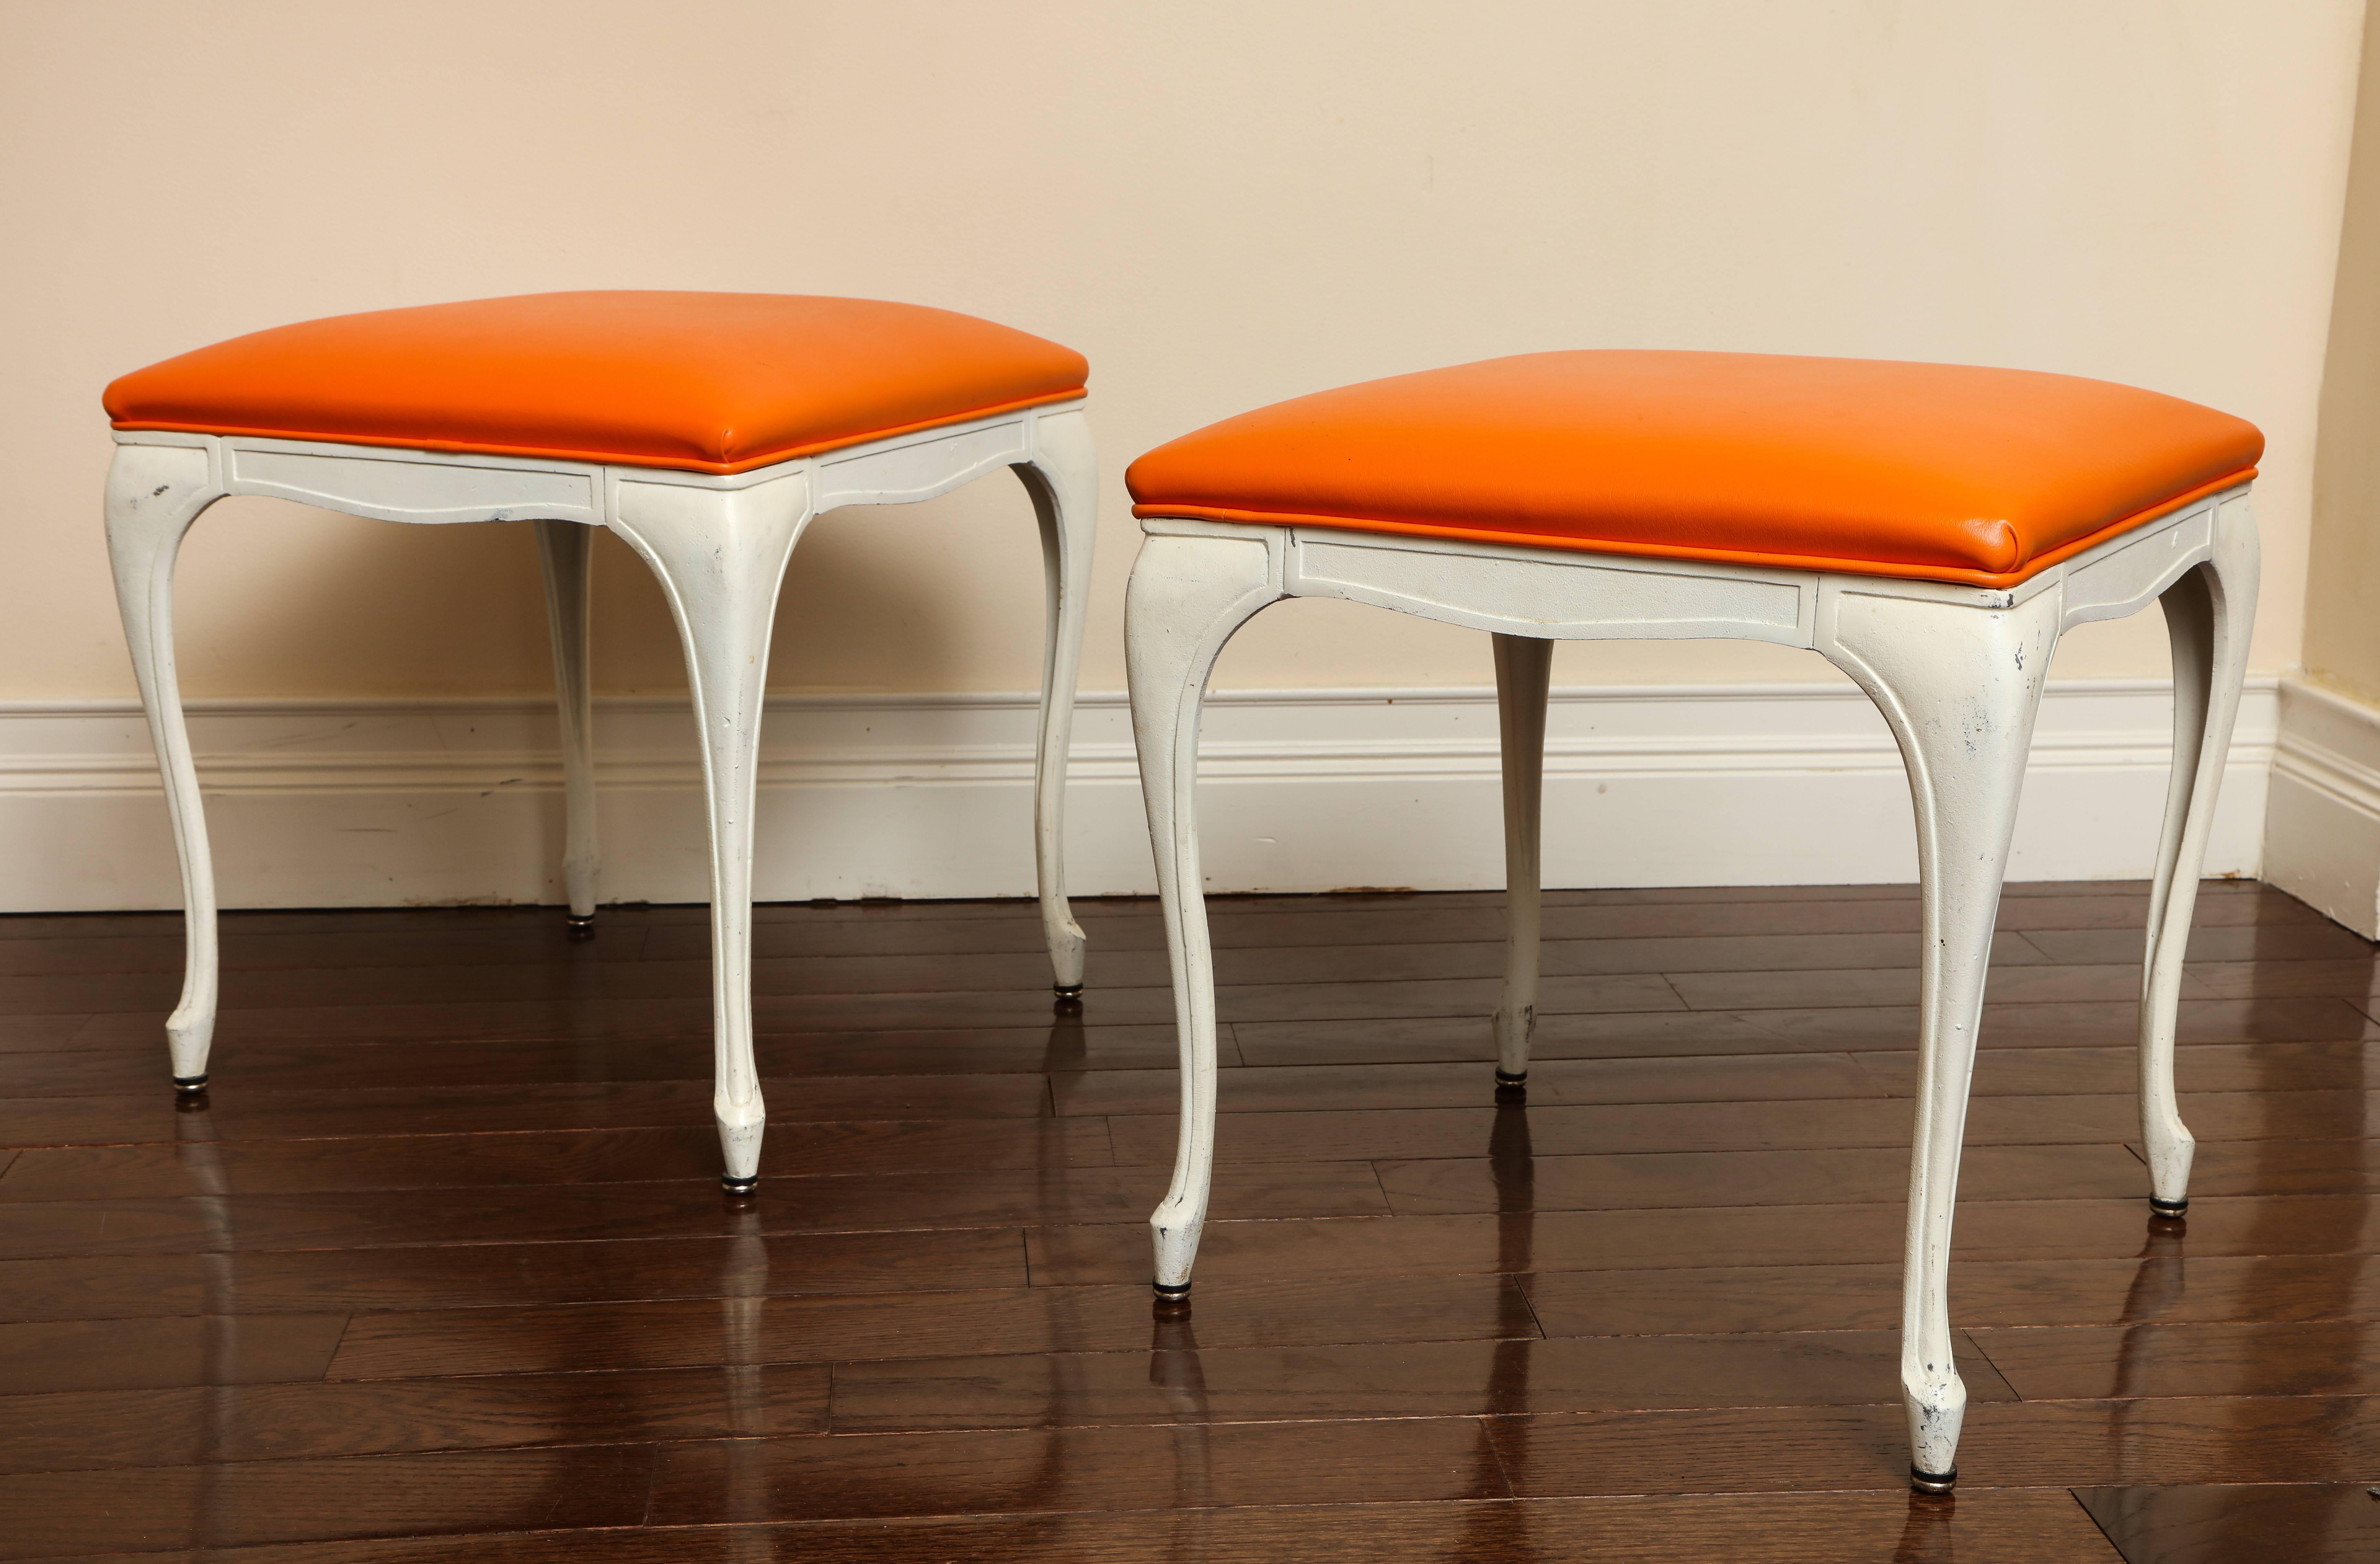 A pair of Mid-Century Modern painted white metal benches or stools with elegantly shaped apron, cabriole legs; the seat cushions upholstered in vibrant orange leather.
Size: 16 1/2